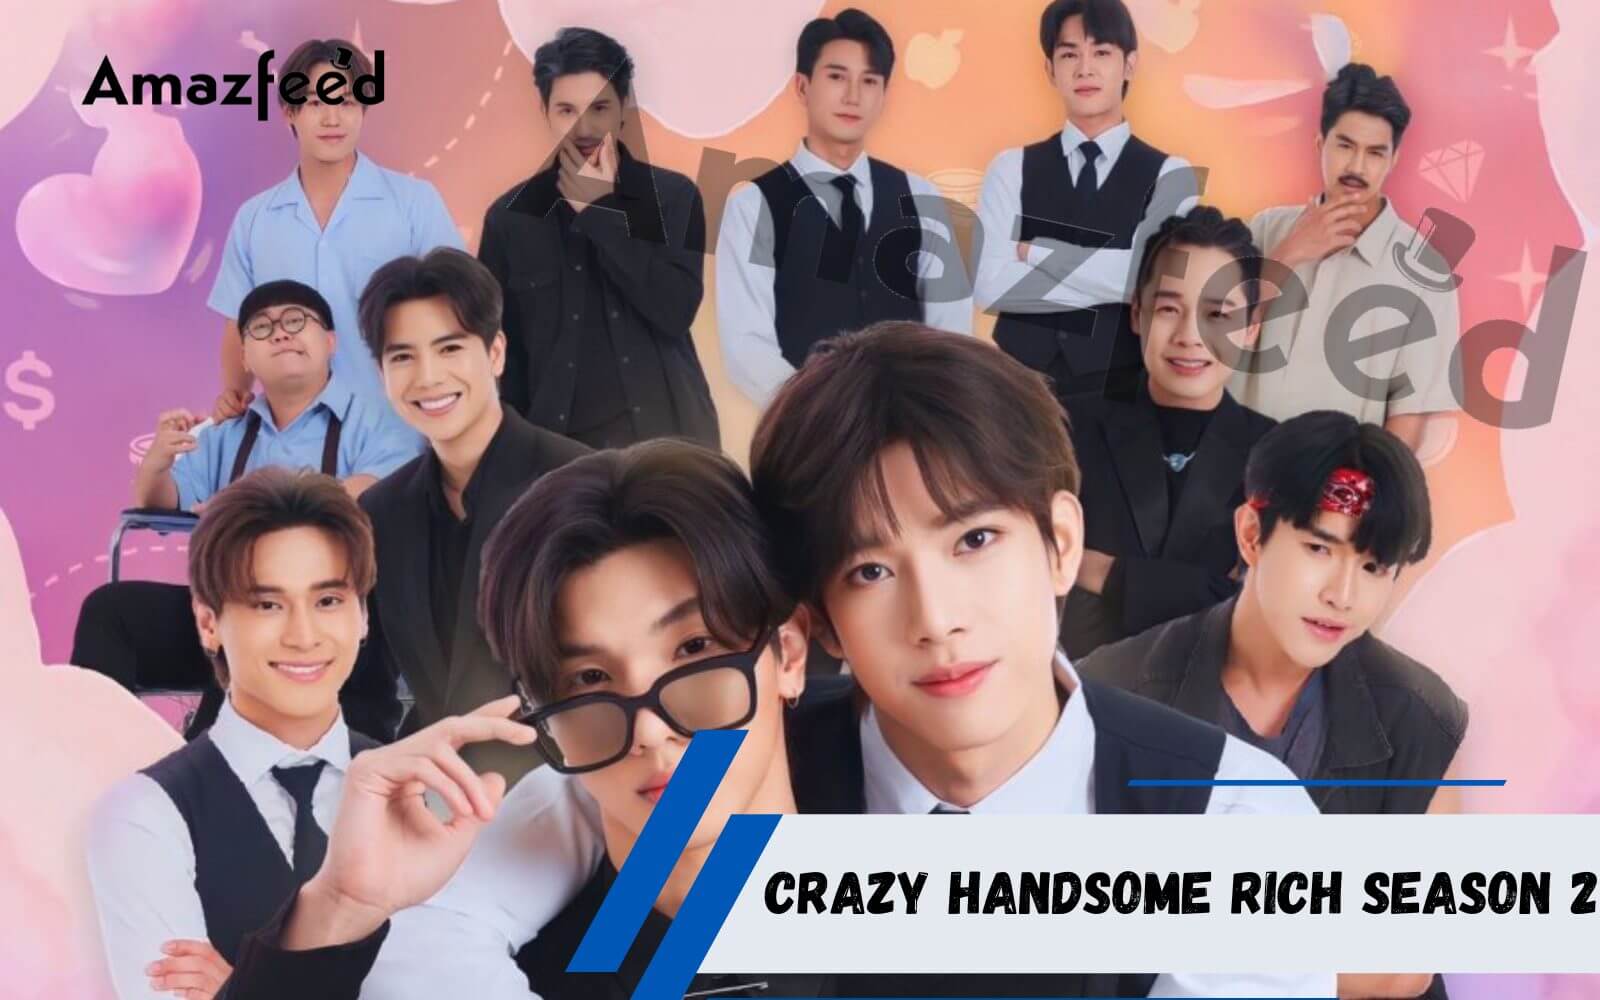 Who Will Be Part Of Crazy Handsome Rich Season 2 (cast and character)